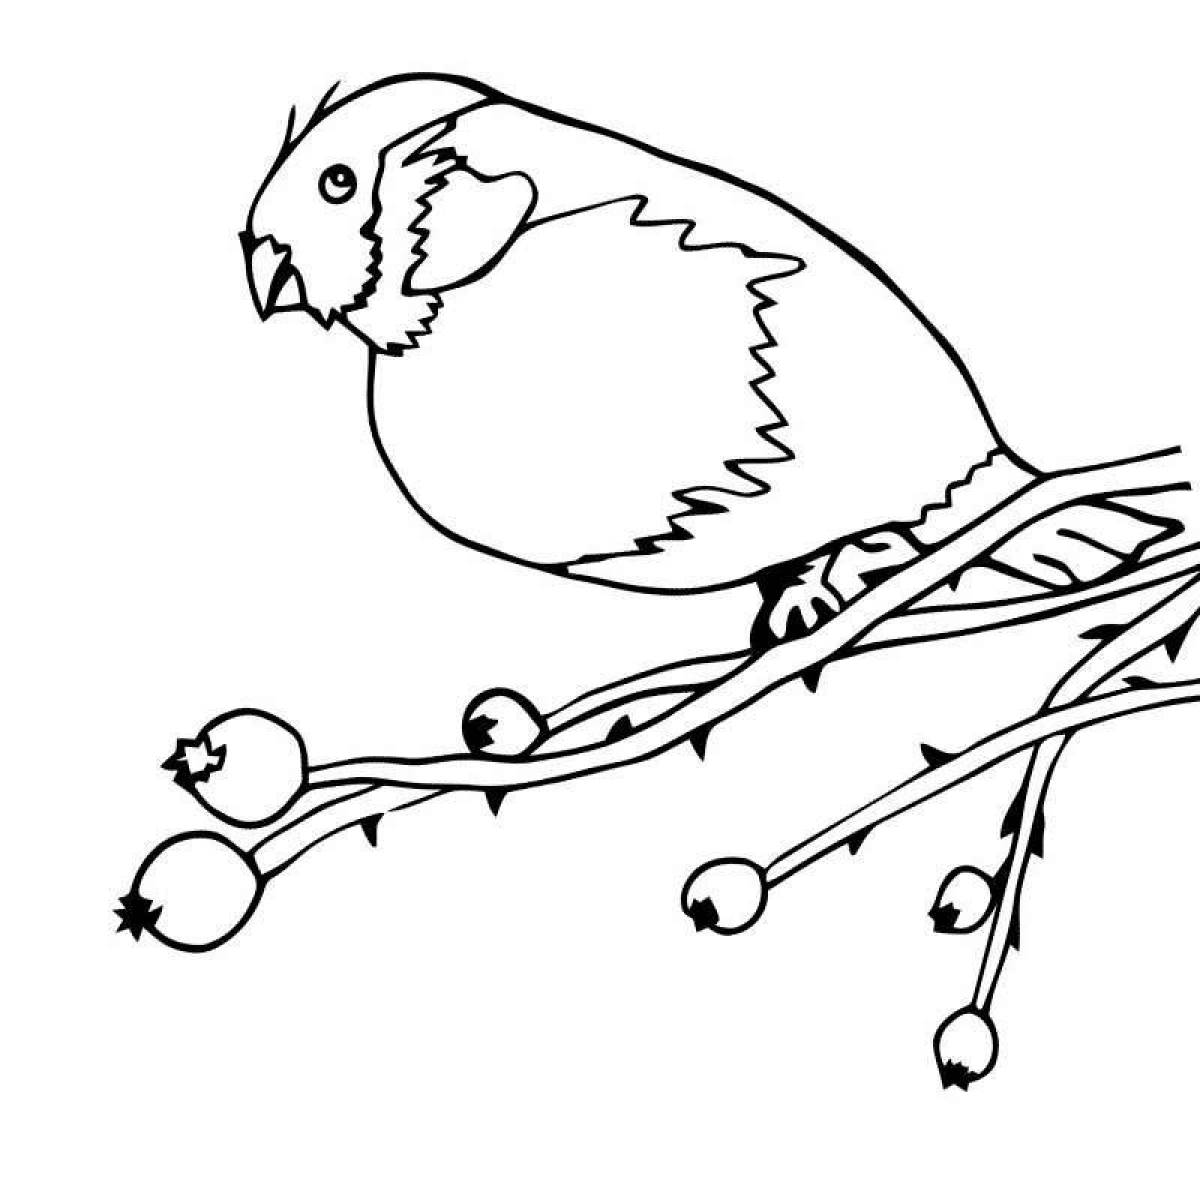 Outstanding bullfinch coloring book for 3-4 year olds